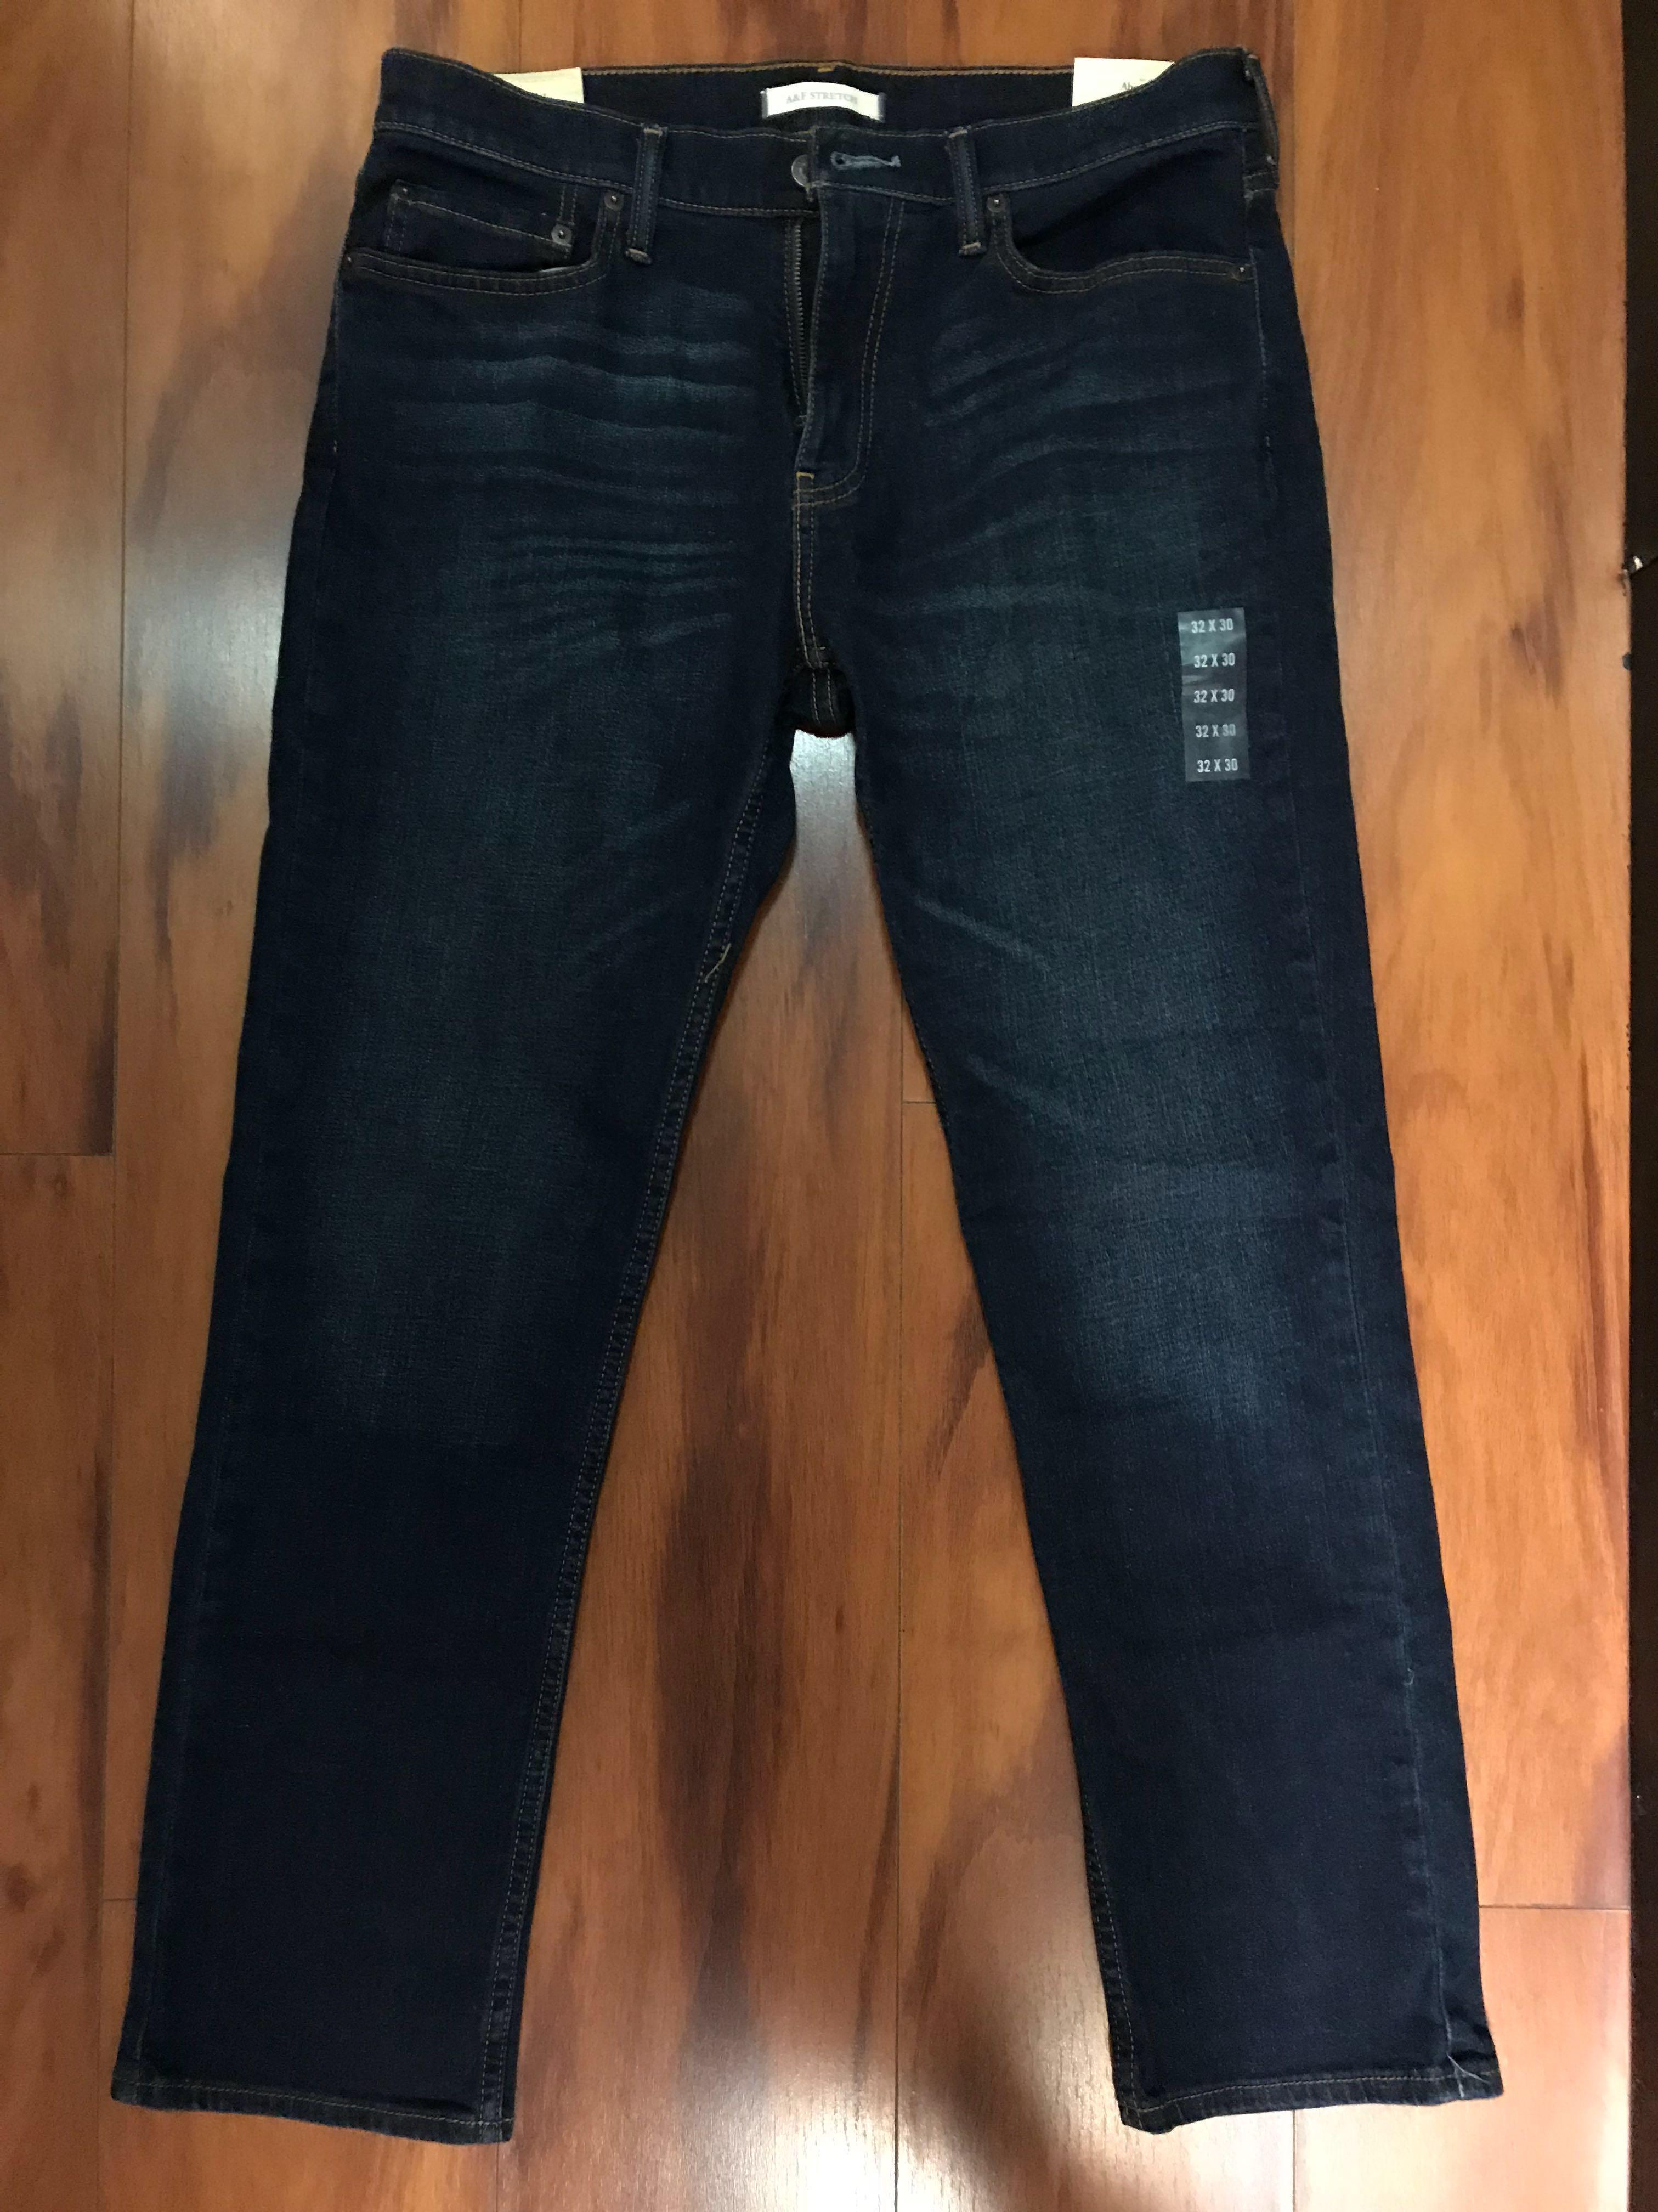 a&f jeans price